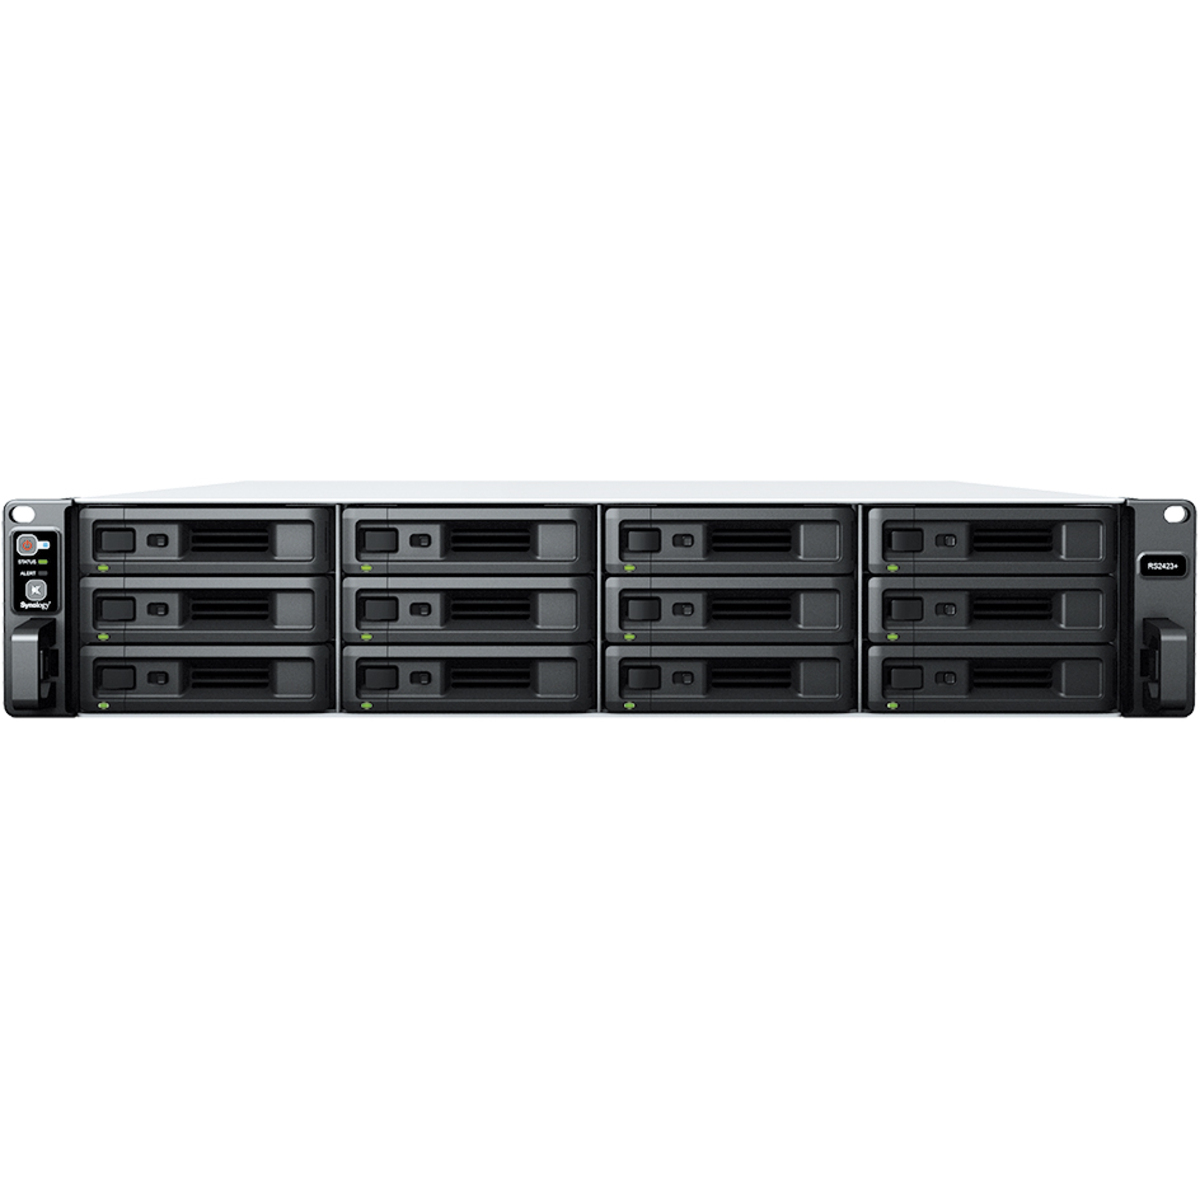 Synology RackStation RS2423+ 128tb 12-Bay RackMount Multimedia / Power User / Business NAS - Network Attached Storage Device 8x16tb Western Digital Gold WD161KRYZ 3.5 7200rpm SATA 6Gb/s HDD ENTERPRISE Class Drives Installed - Burn-In Tested RackStation RS2423+